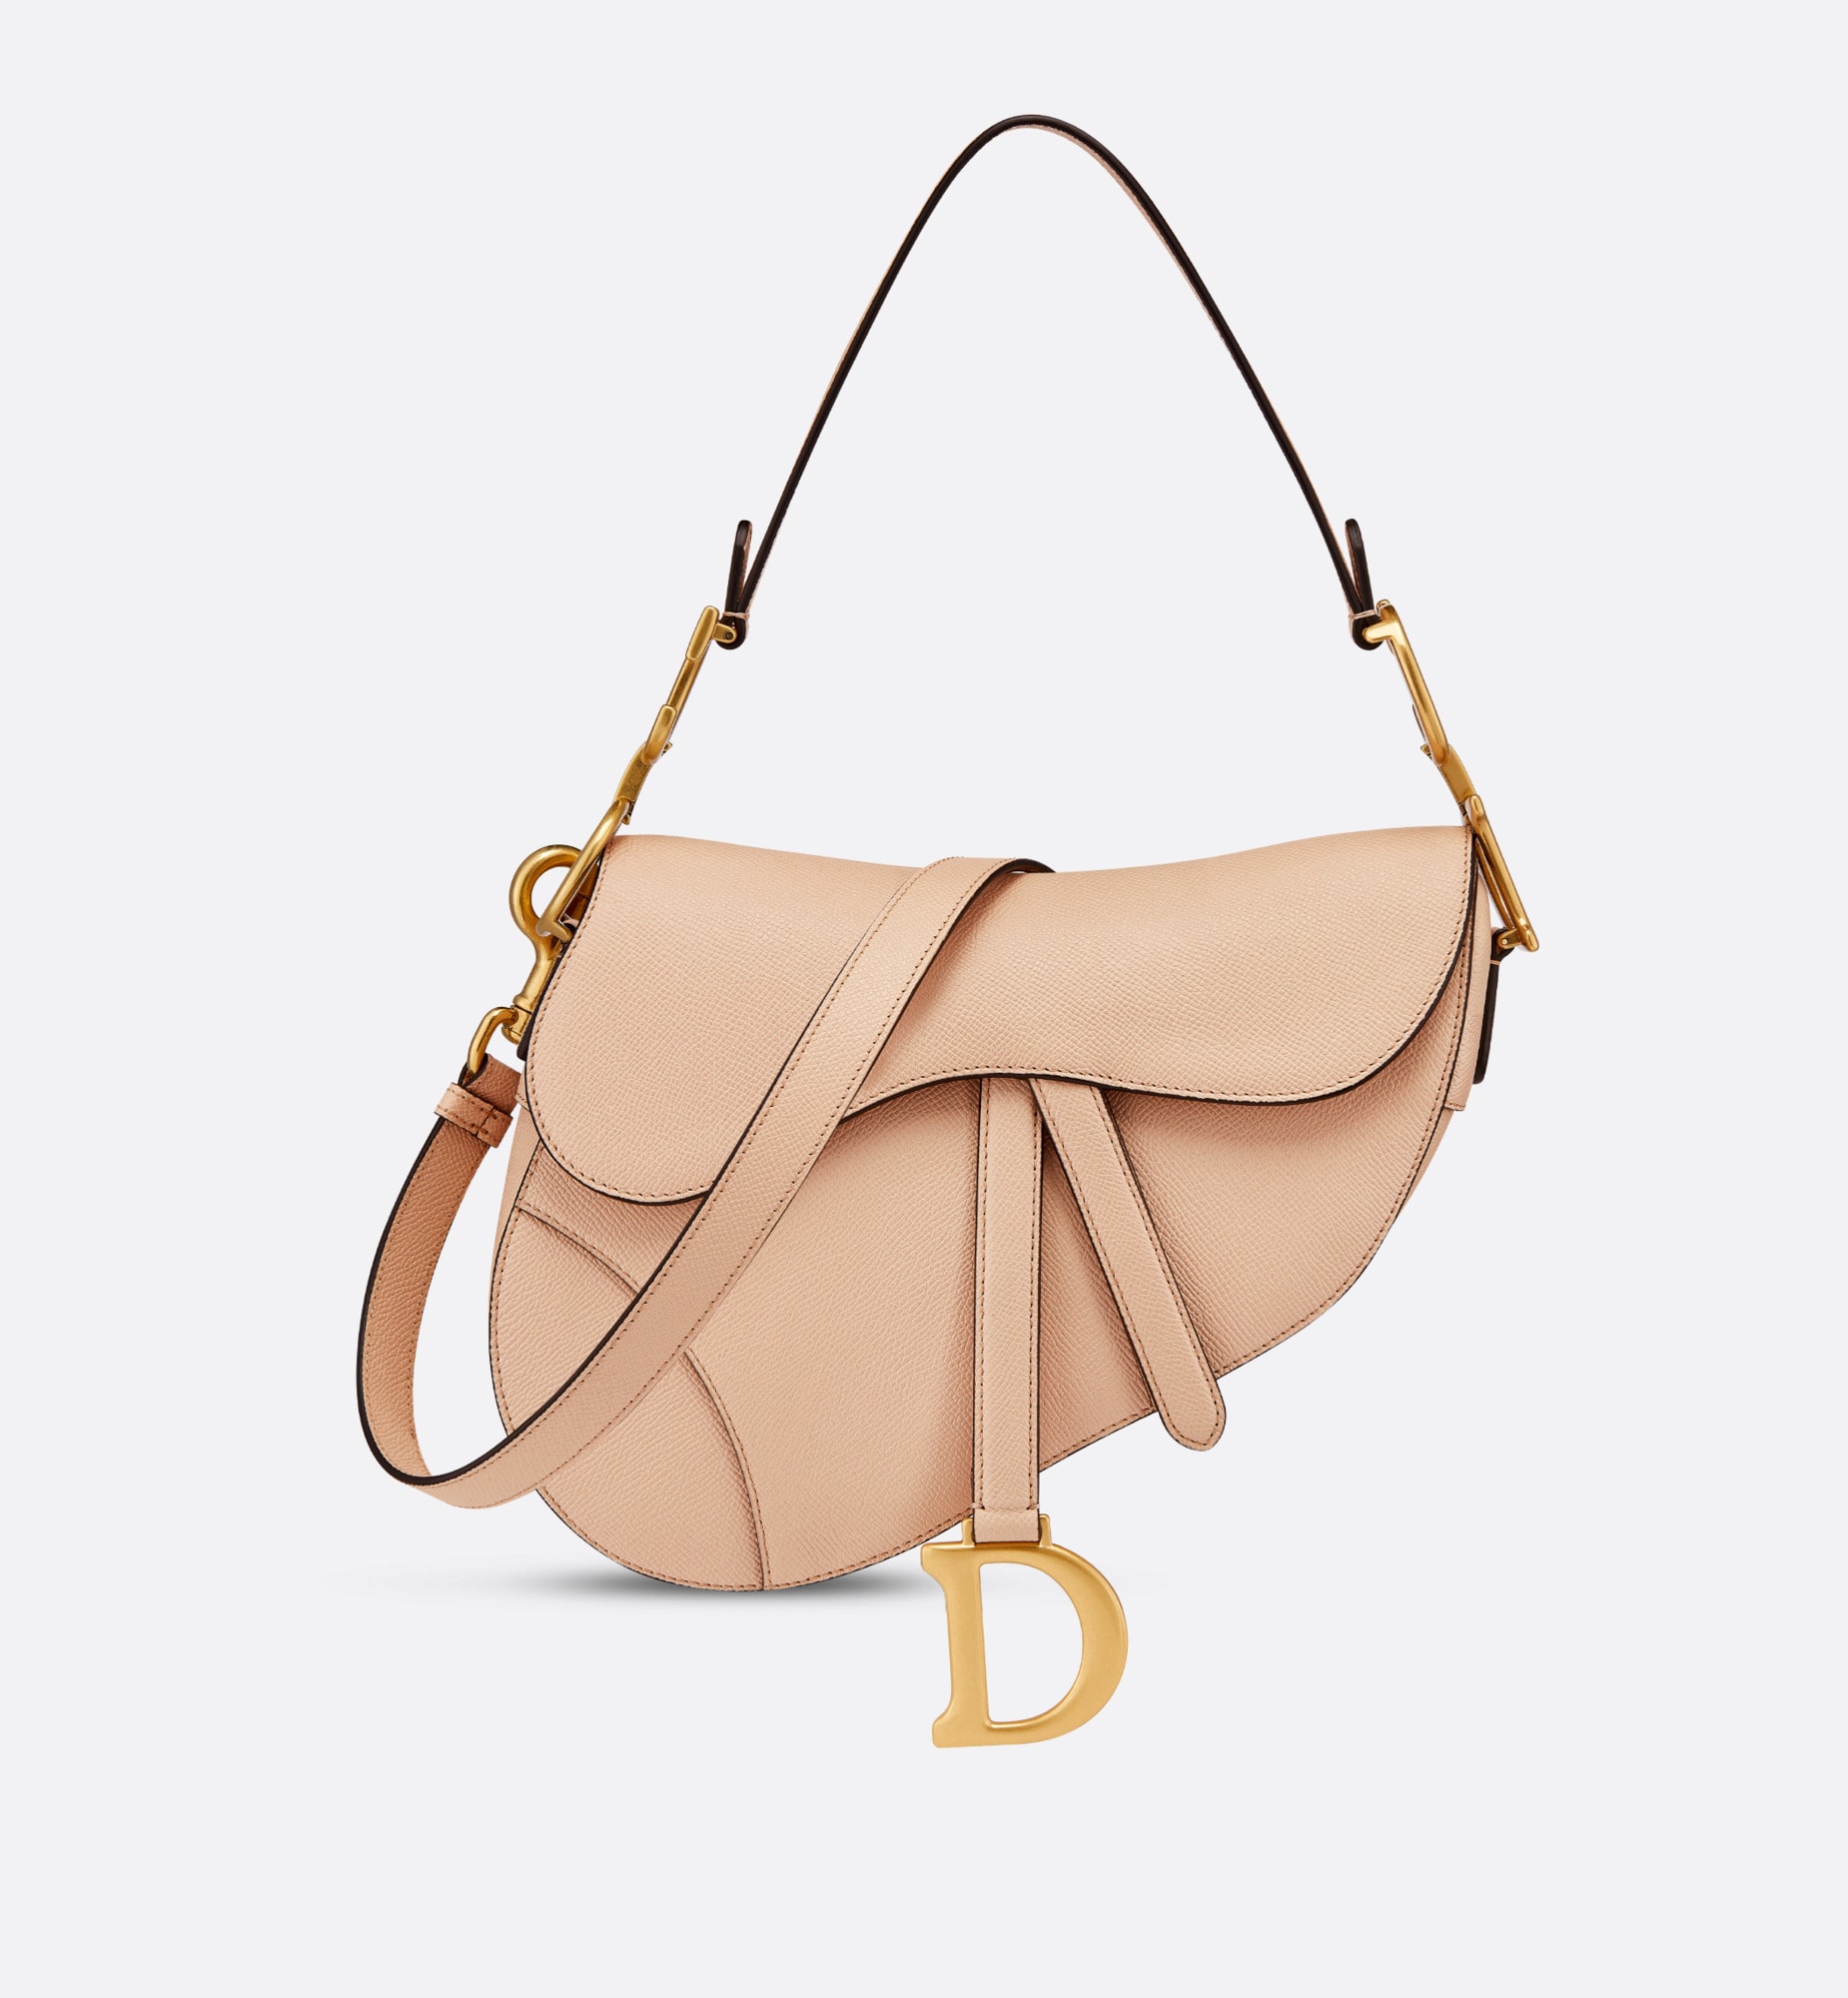 Dior saddle bag with strap sand pink grained calfskin